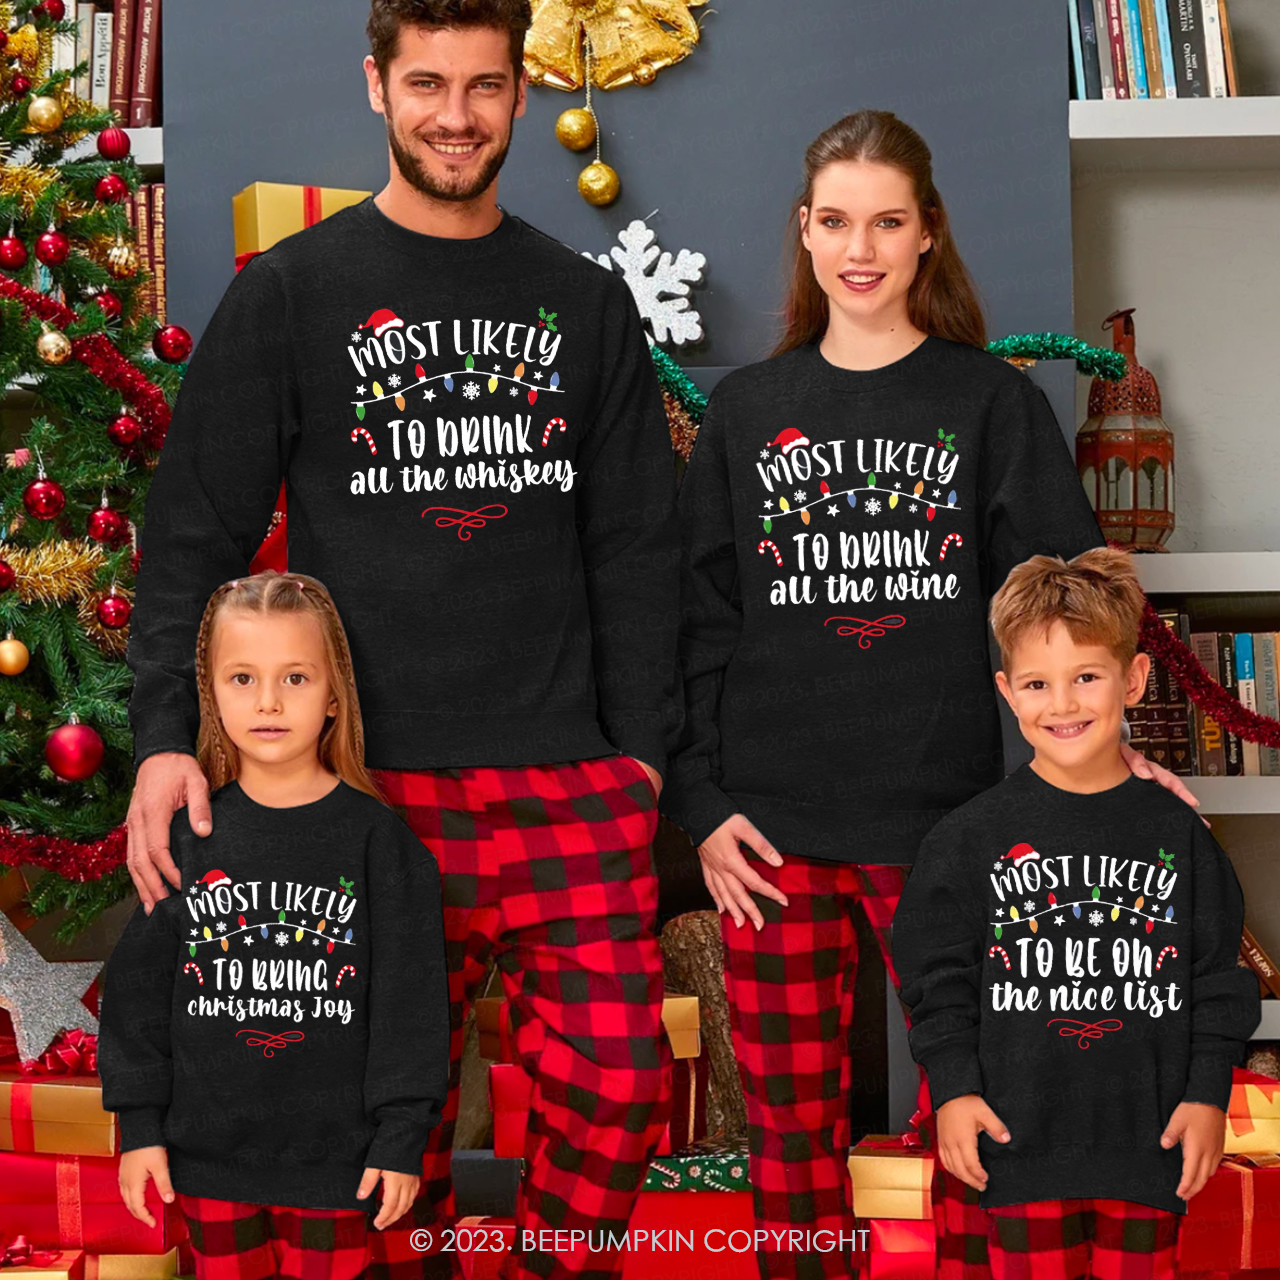 60 Quotes Most Likely And Custom Family Christmas Sweatshirts 2023